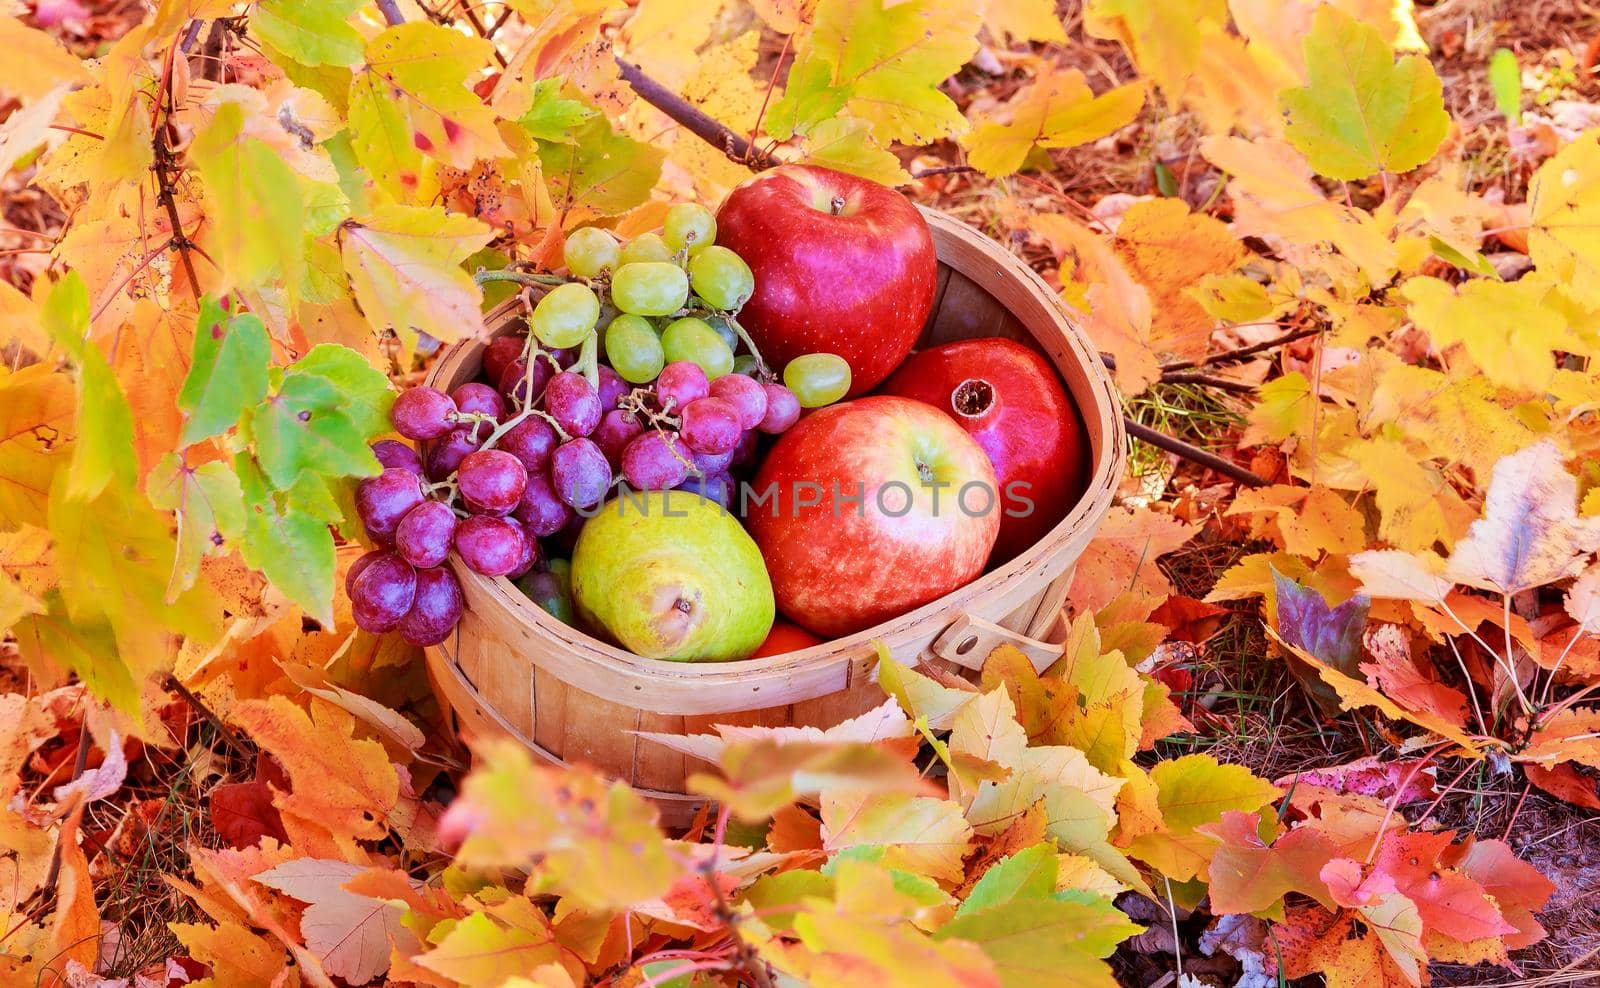 autumn leaves yellow apples grapes grenades basket of apples and grapes on the green grass